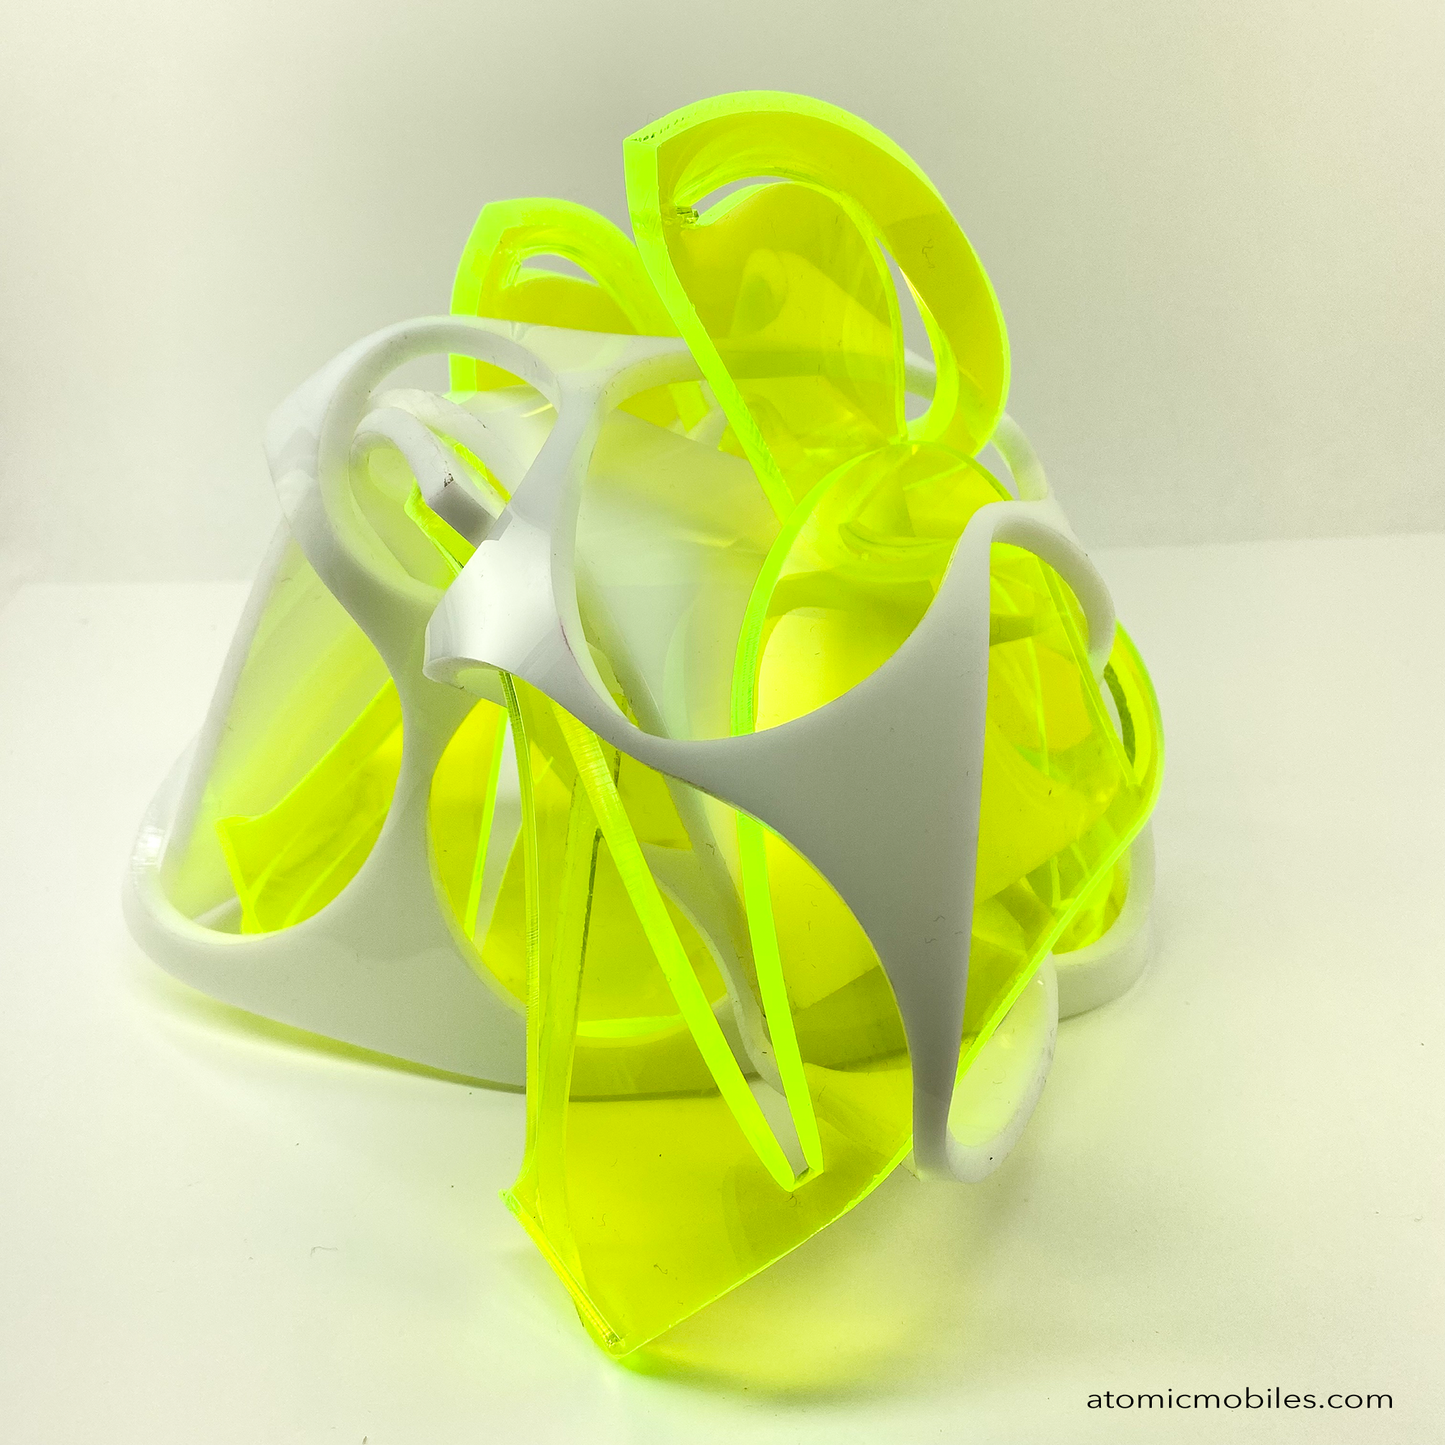 Thrill abstract art sculpture in neon fluorescent green and opaque white acrylic plexiglass - upcycled and recycled acrylic one-of-a-kind modern art by Debra Ann of AtomicMobiles.com in Los Angeles